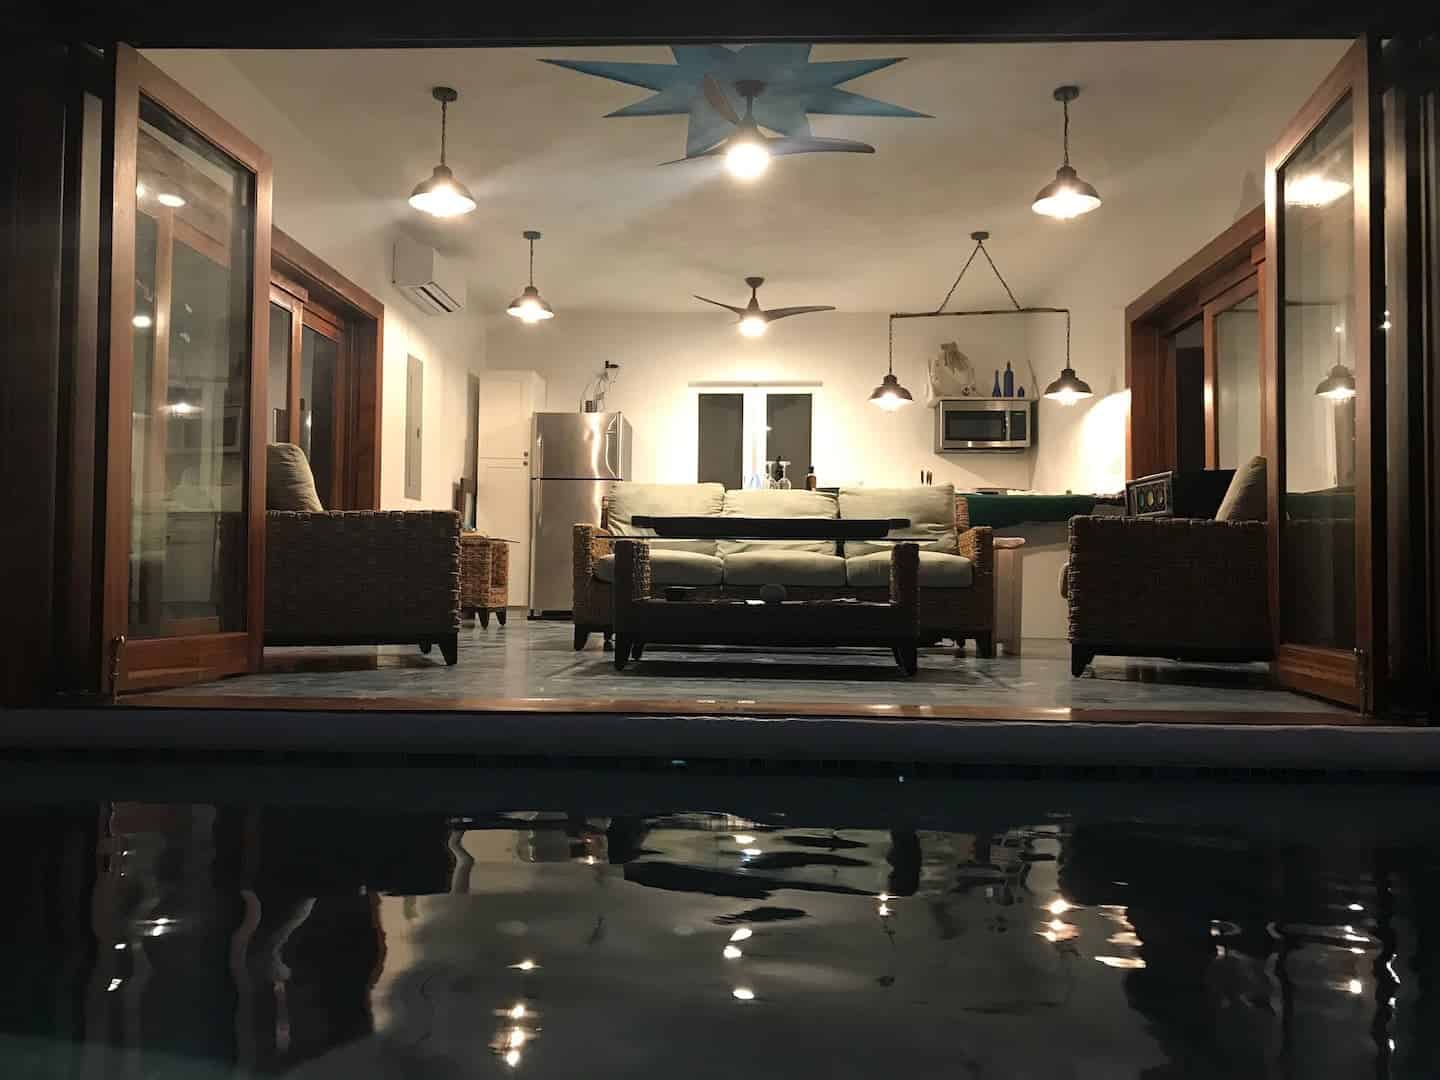 Image of Airbnb rental in Turks and Caicos Islands